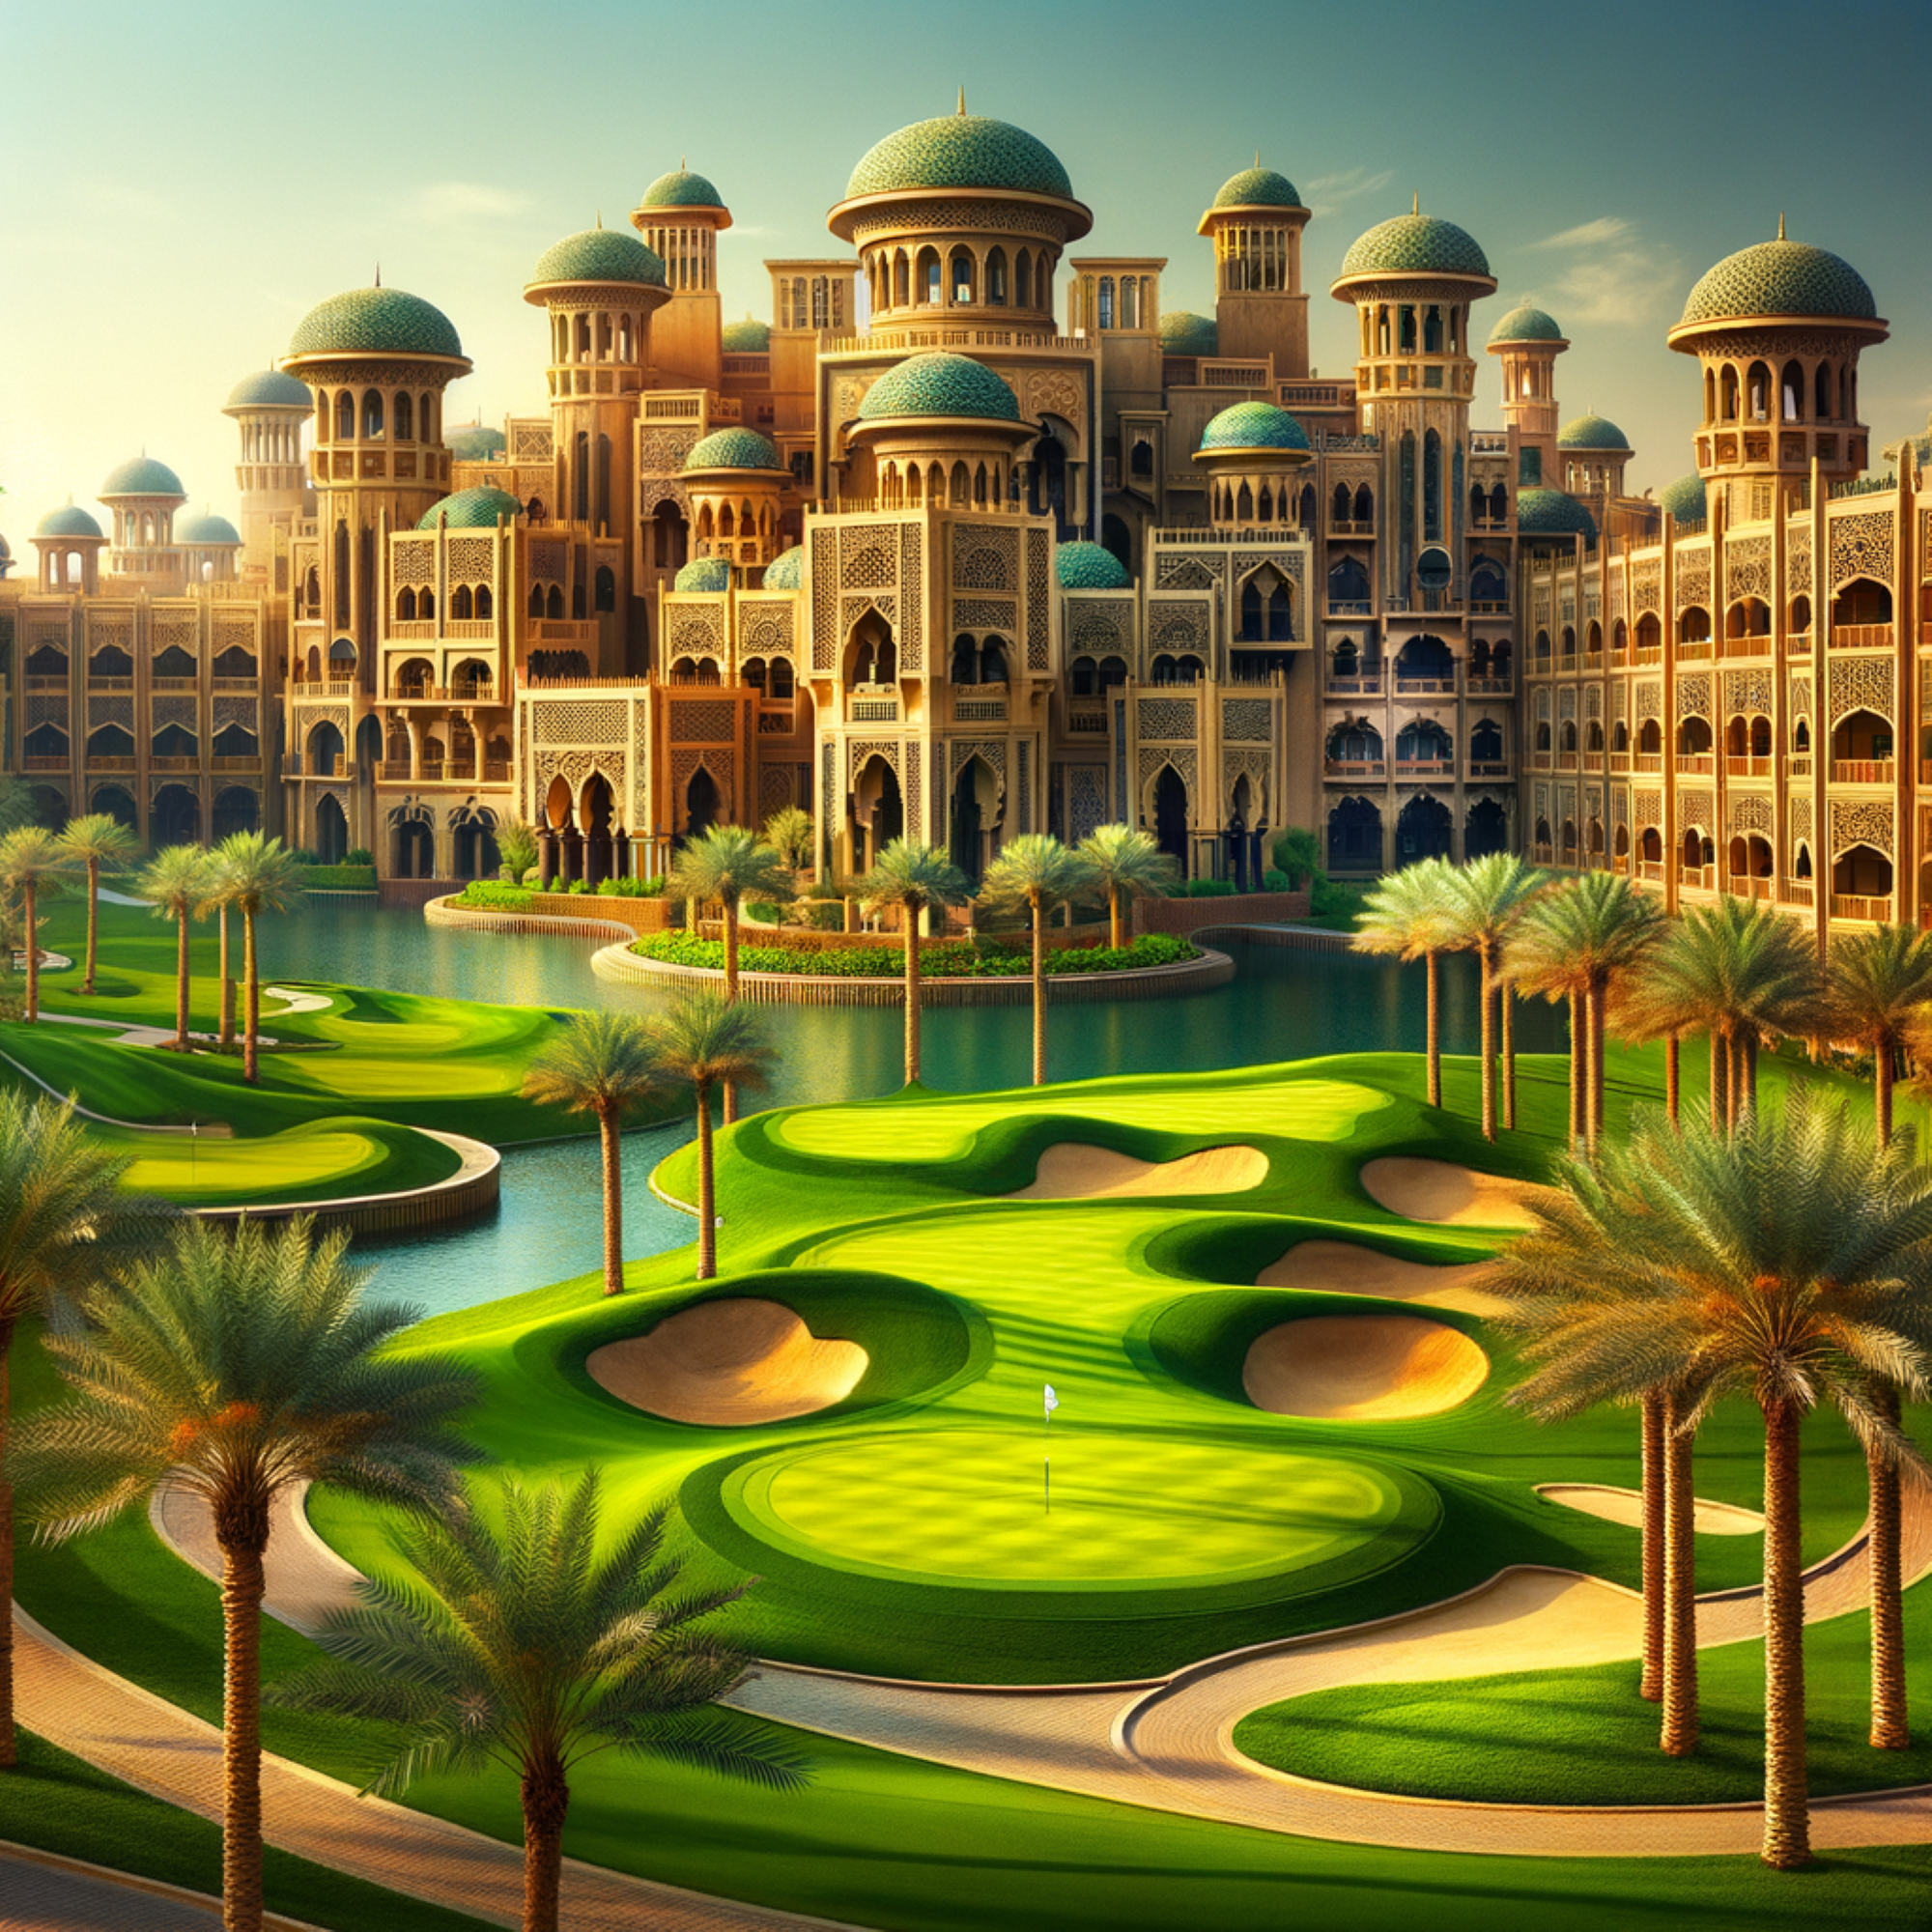 Golf course surrounded by Arabic architecture and palm trees